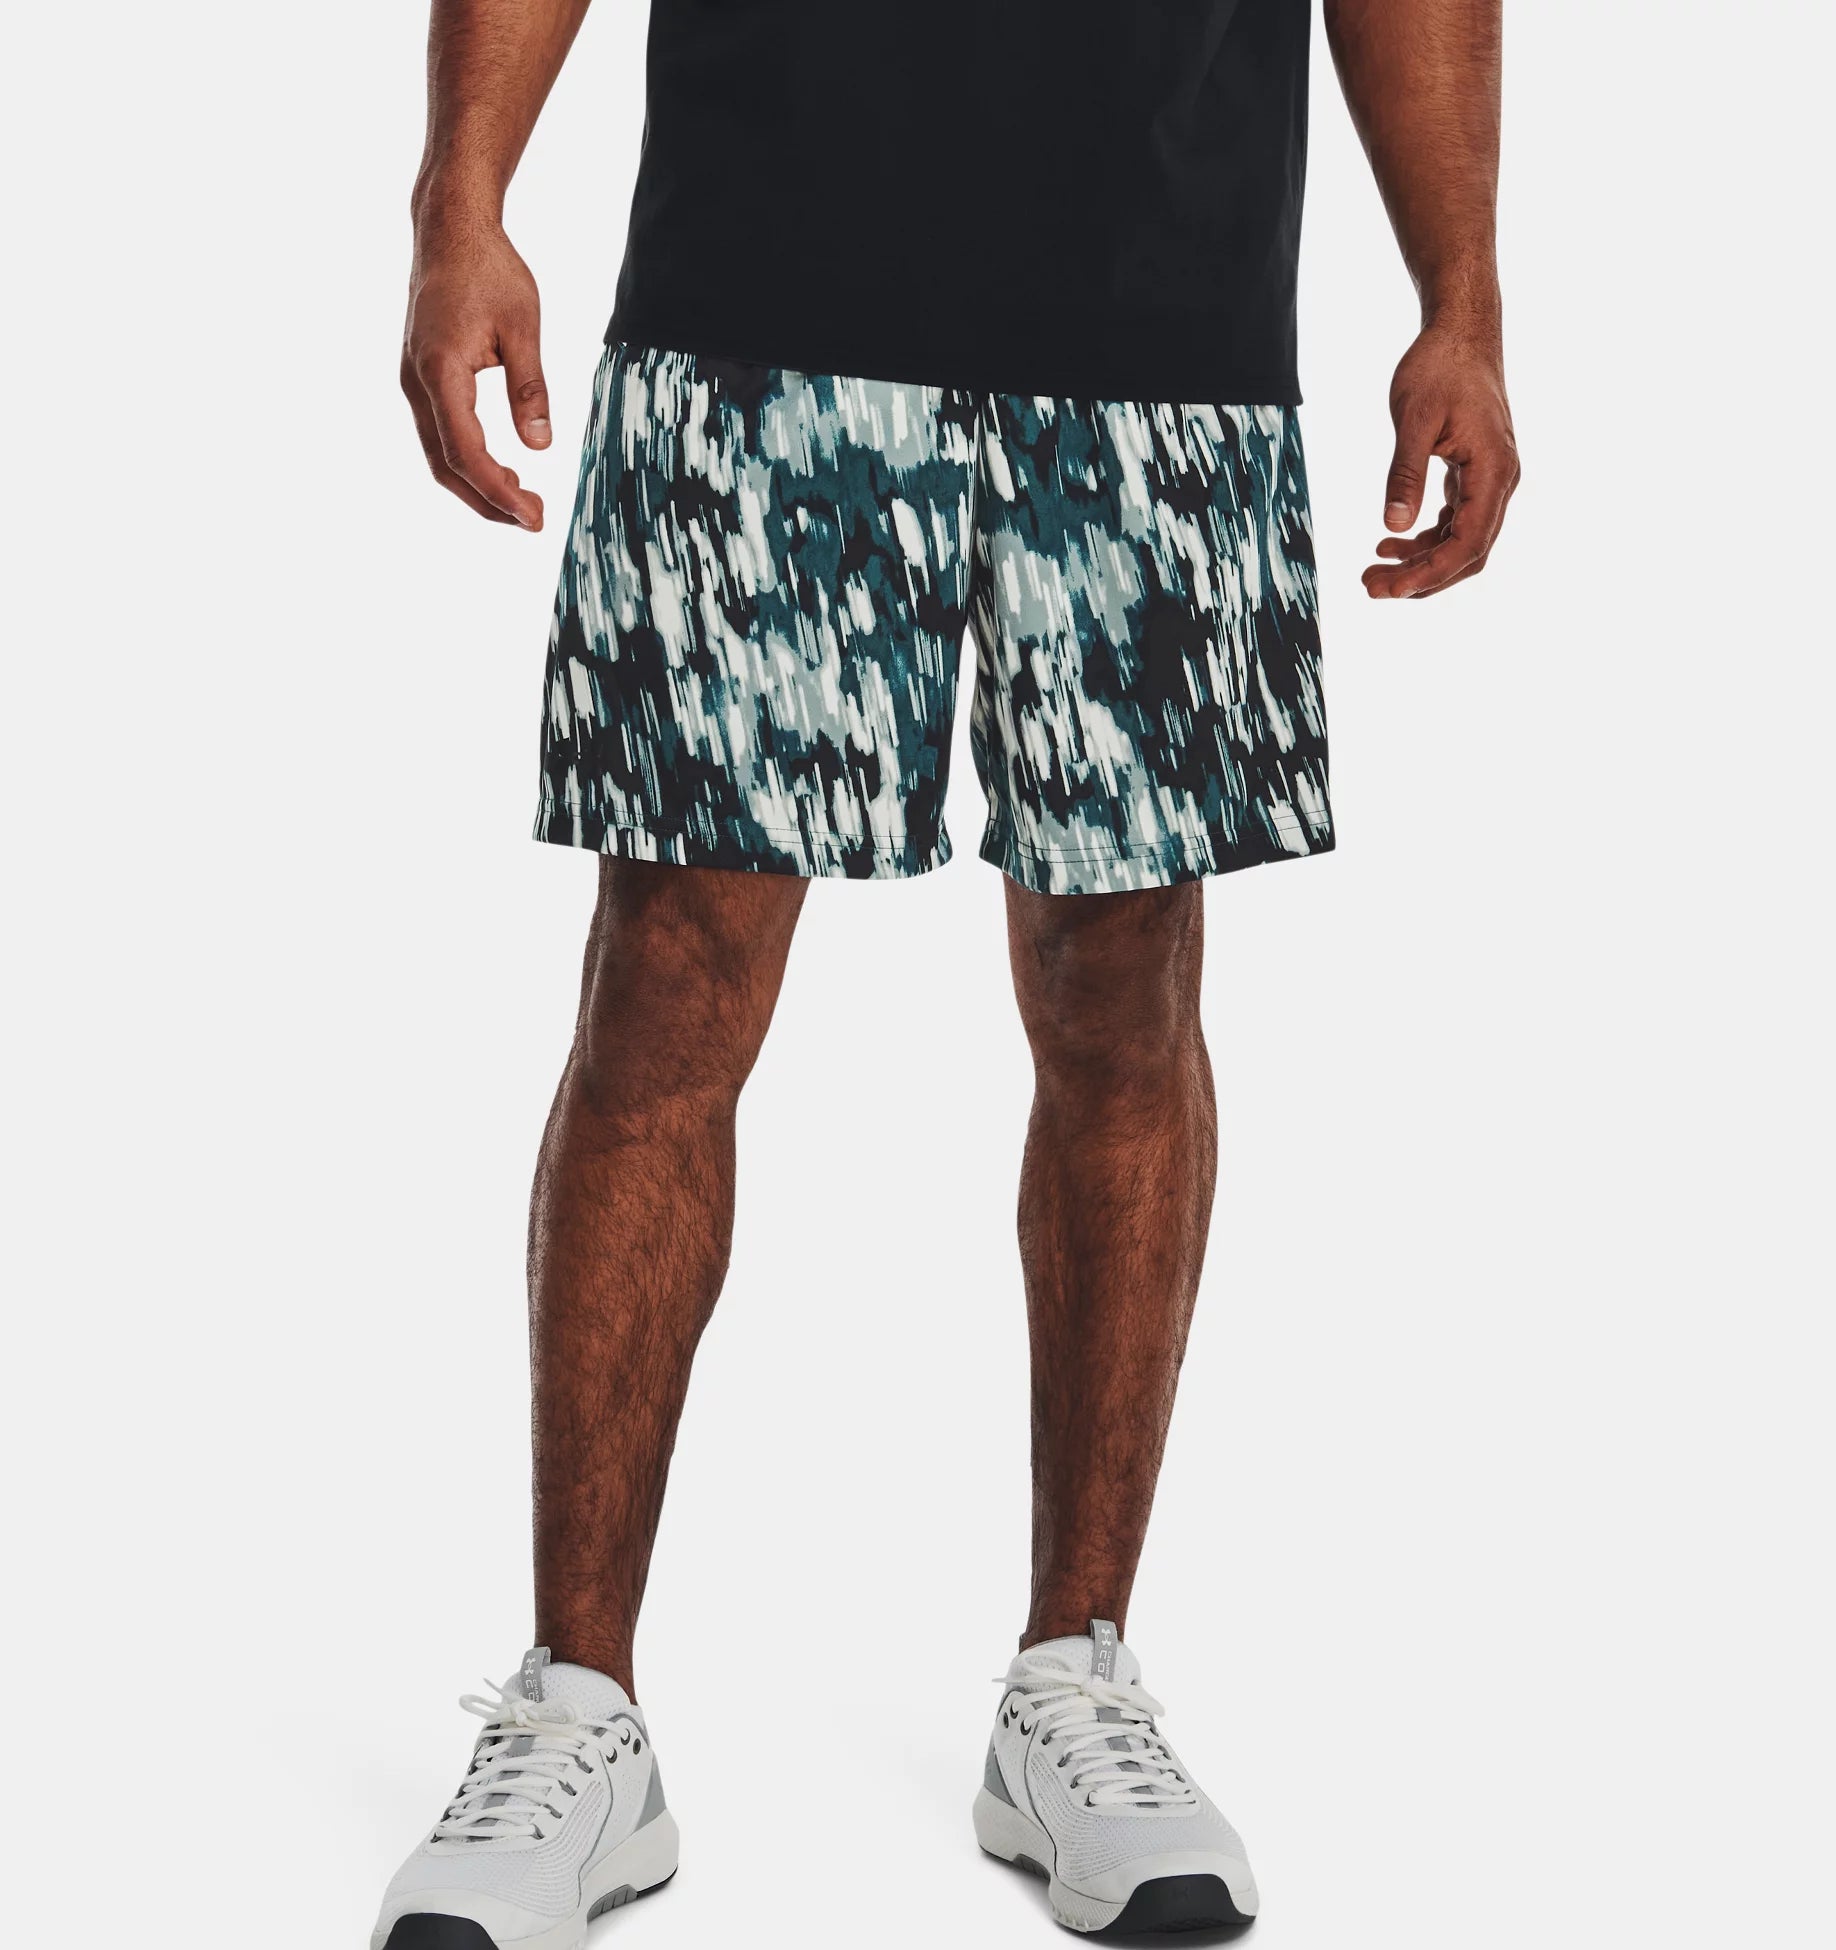 Under Armour UA Tech Printed Shorts 1370402 - Clothing & Accessories